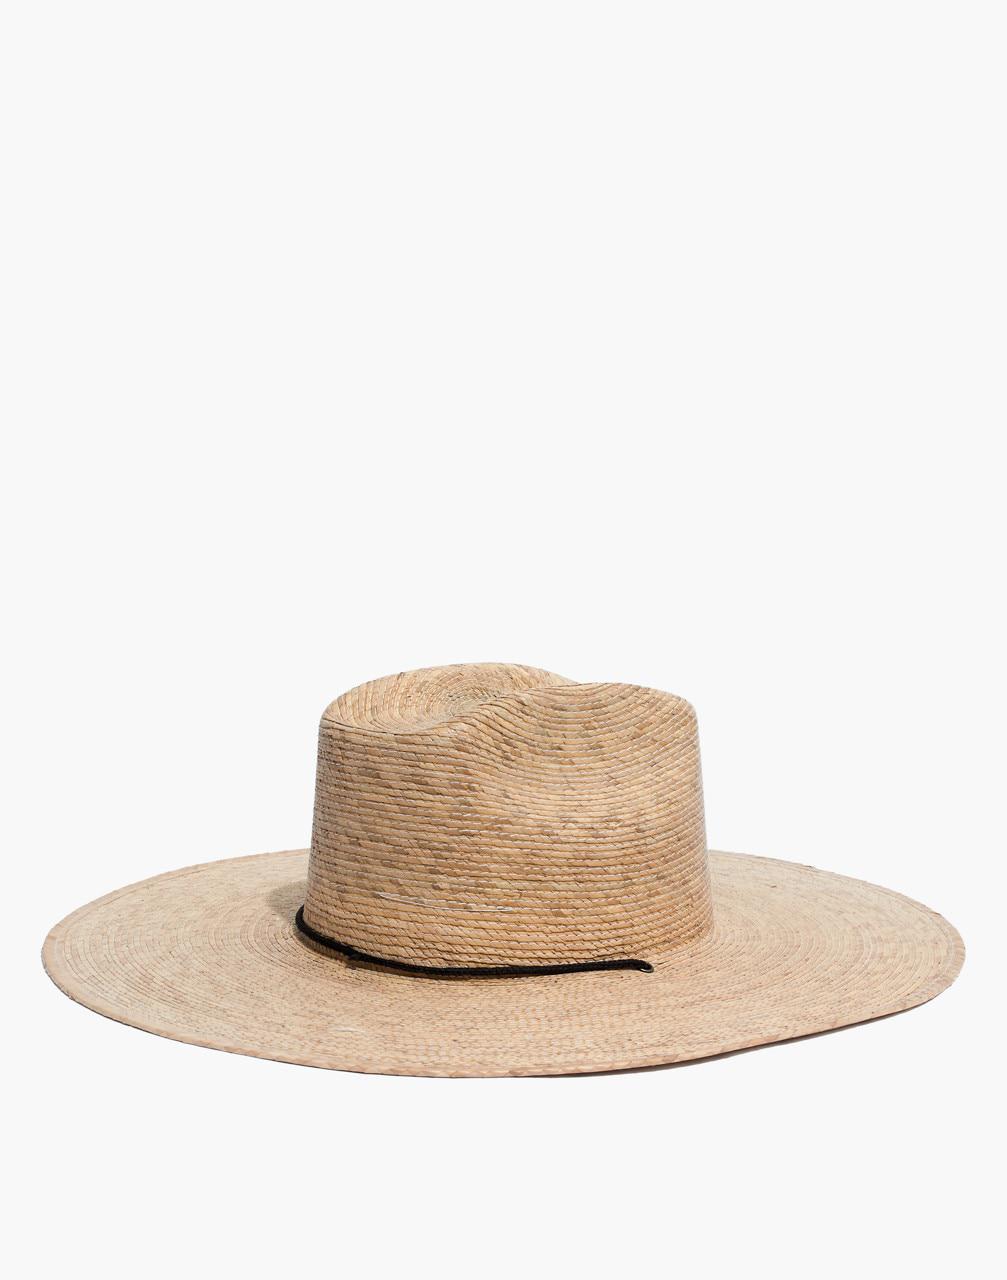 Madewell Communitie Bolo Chico Hat in Natural - Lyst